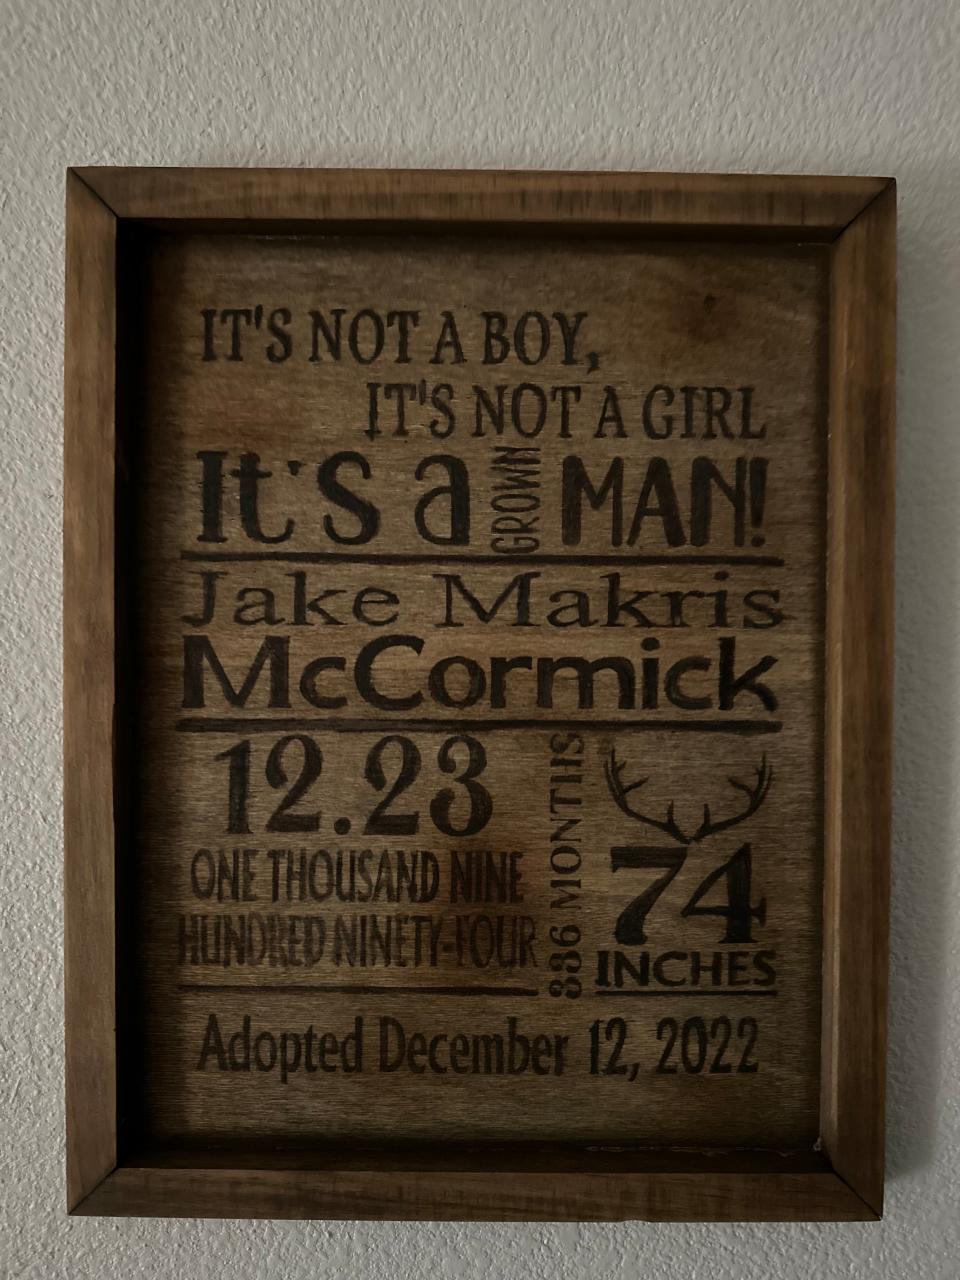 One of the gifts was a wood-burned plaque styled like a birth announcement. It read: "It's not a boy, it's not a girl, it's a grown man!"